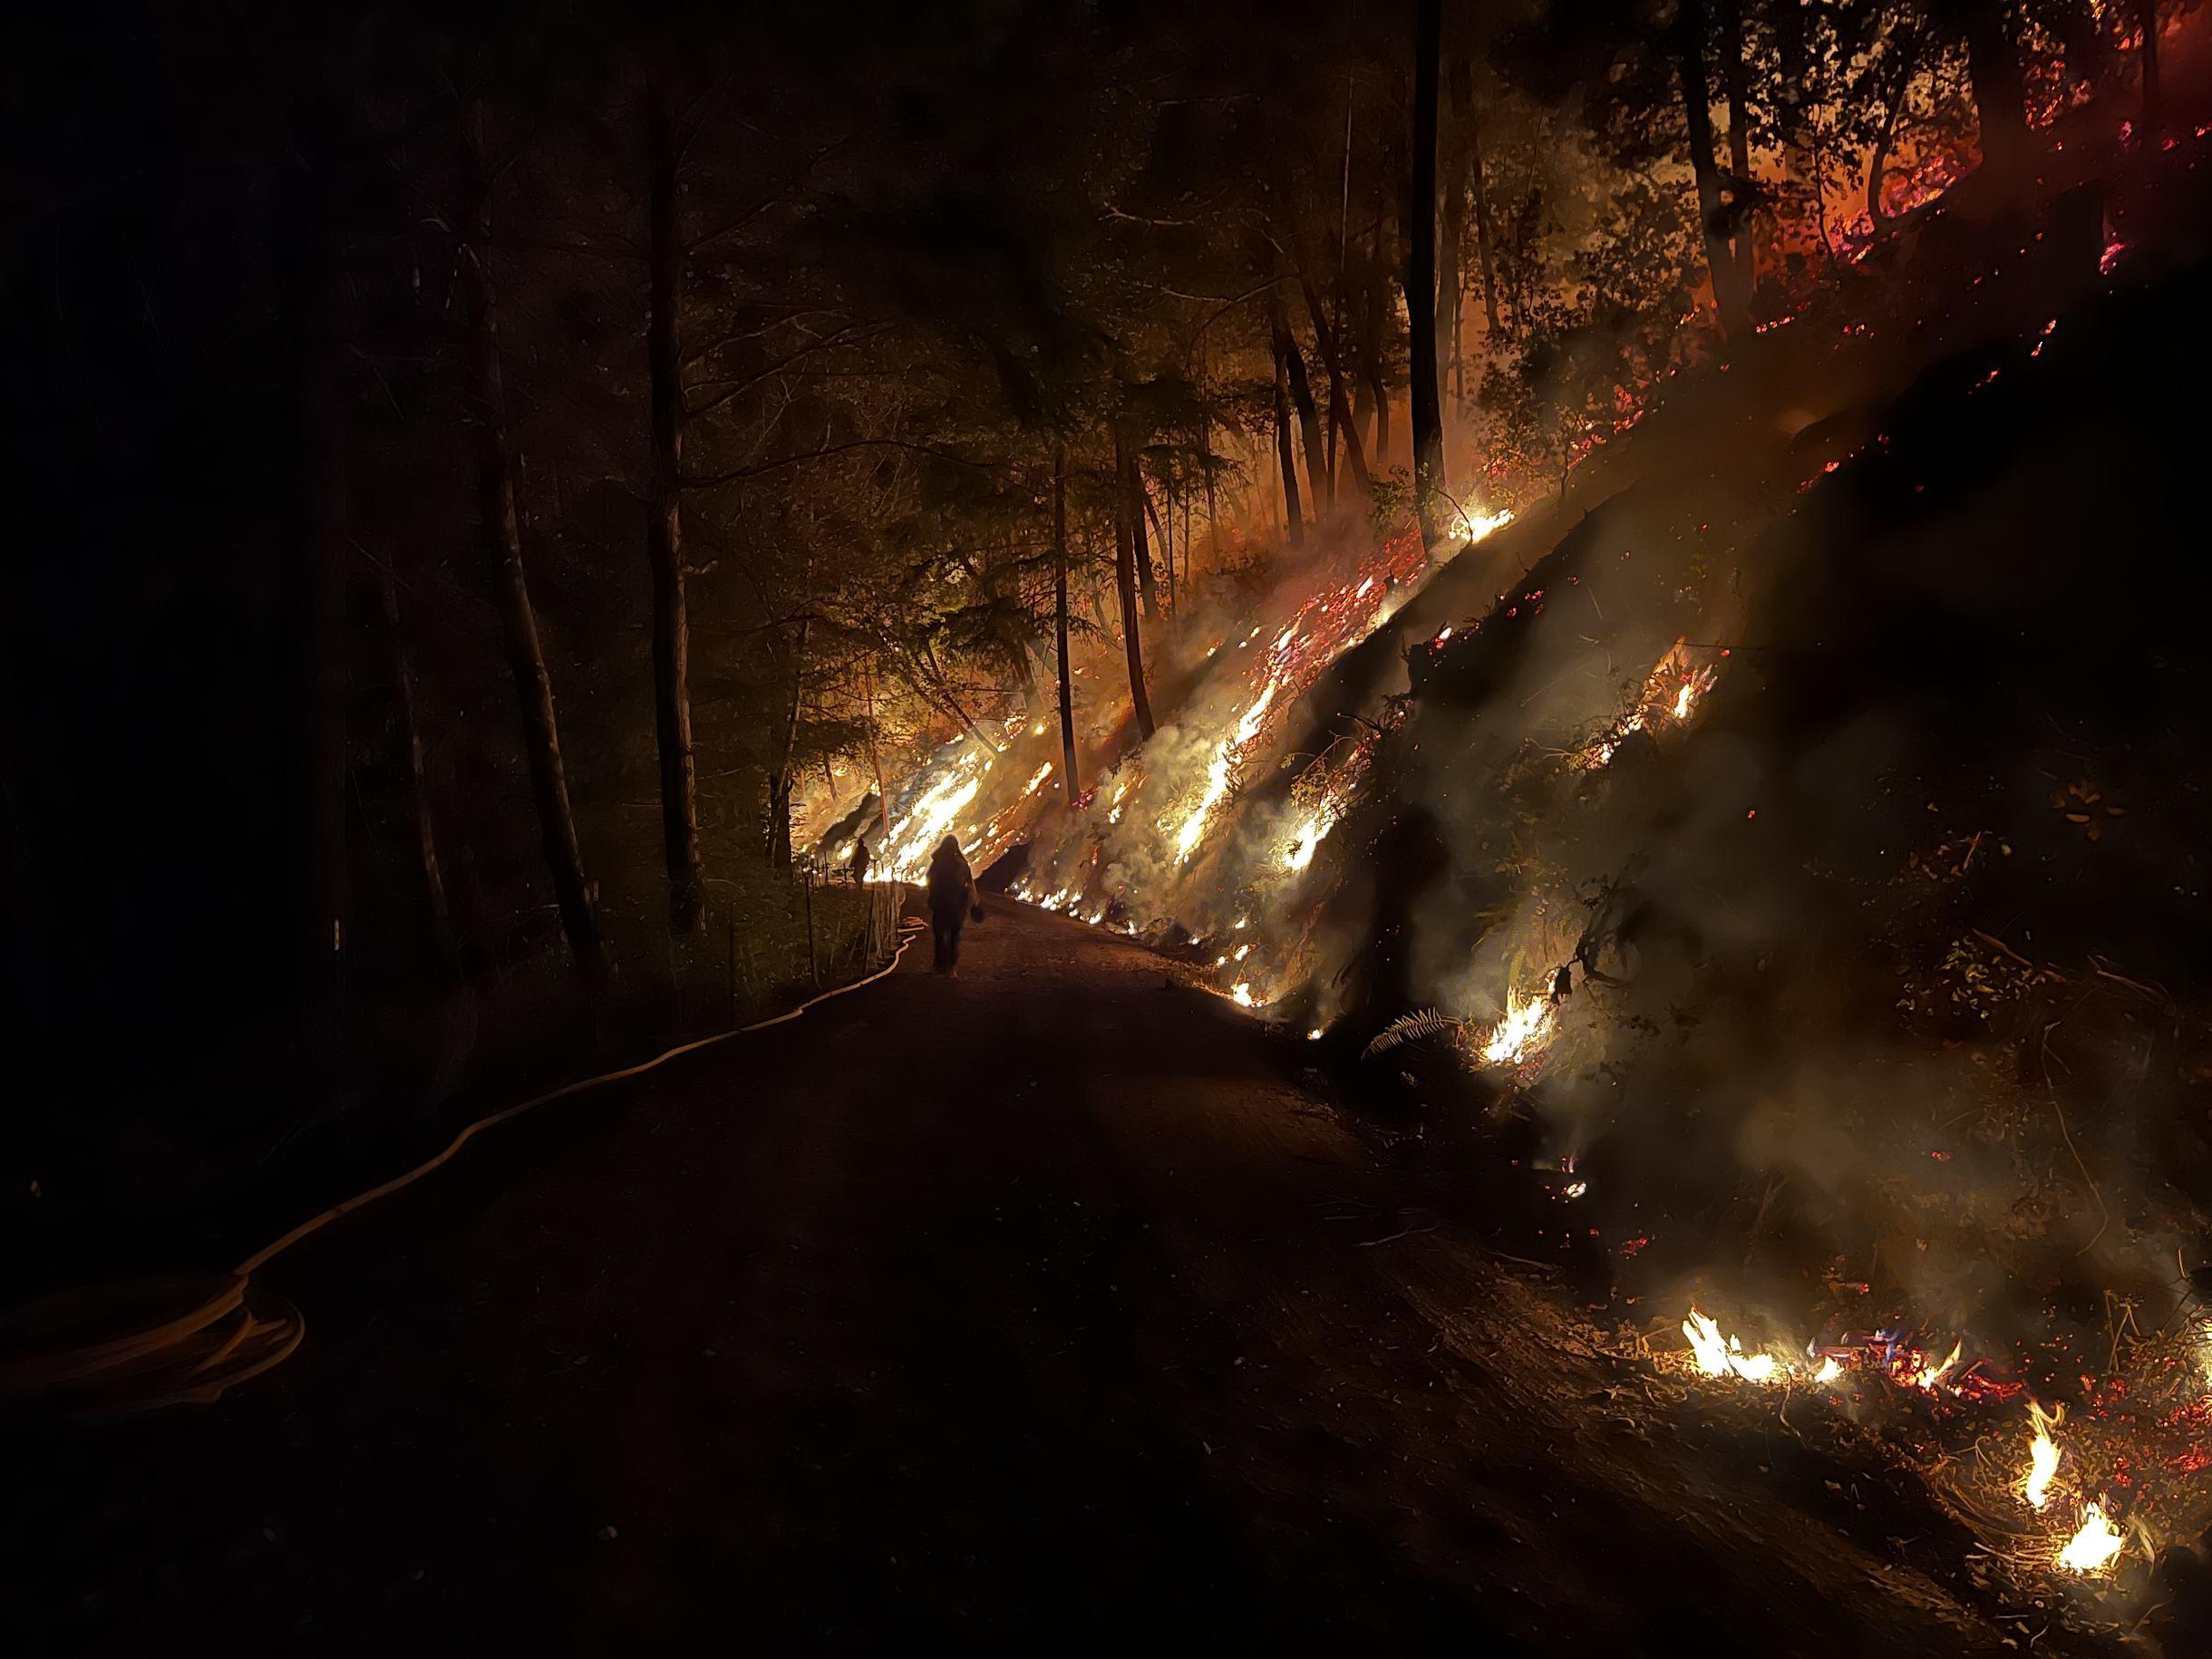 Steep hillside alongside road with wildland firefighter standing using drip torches. Fire throughout the hillside.